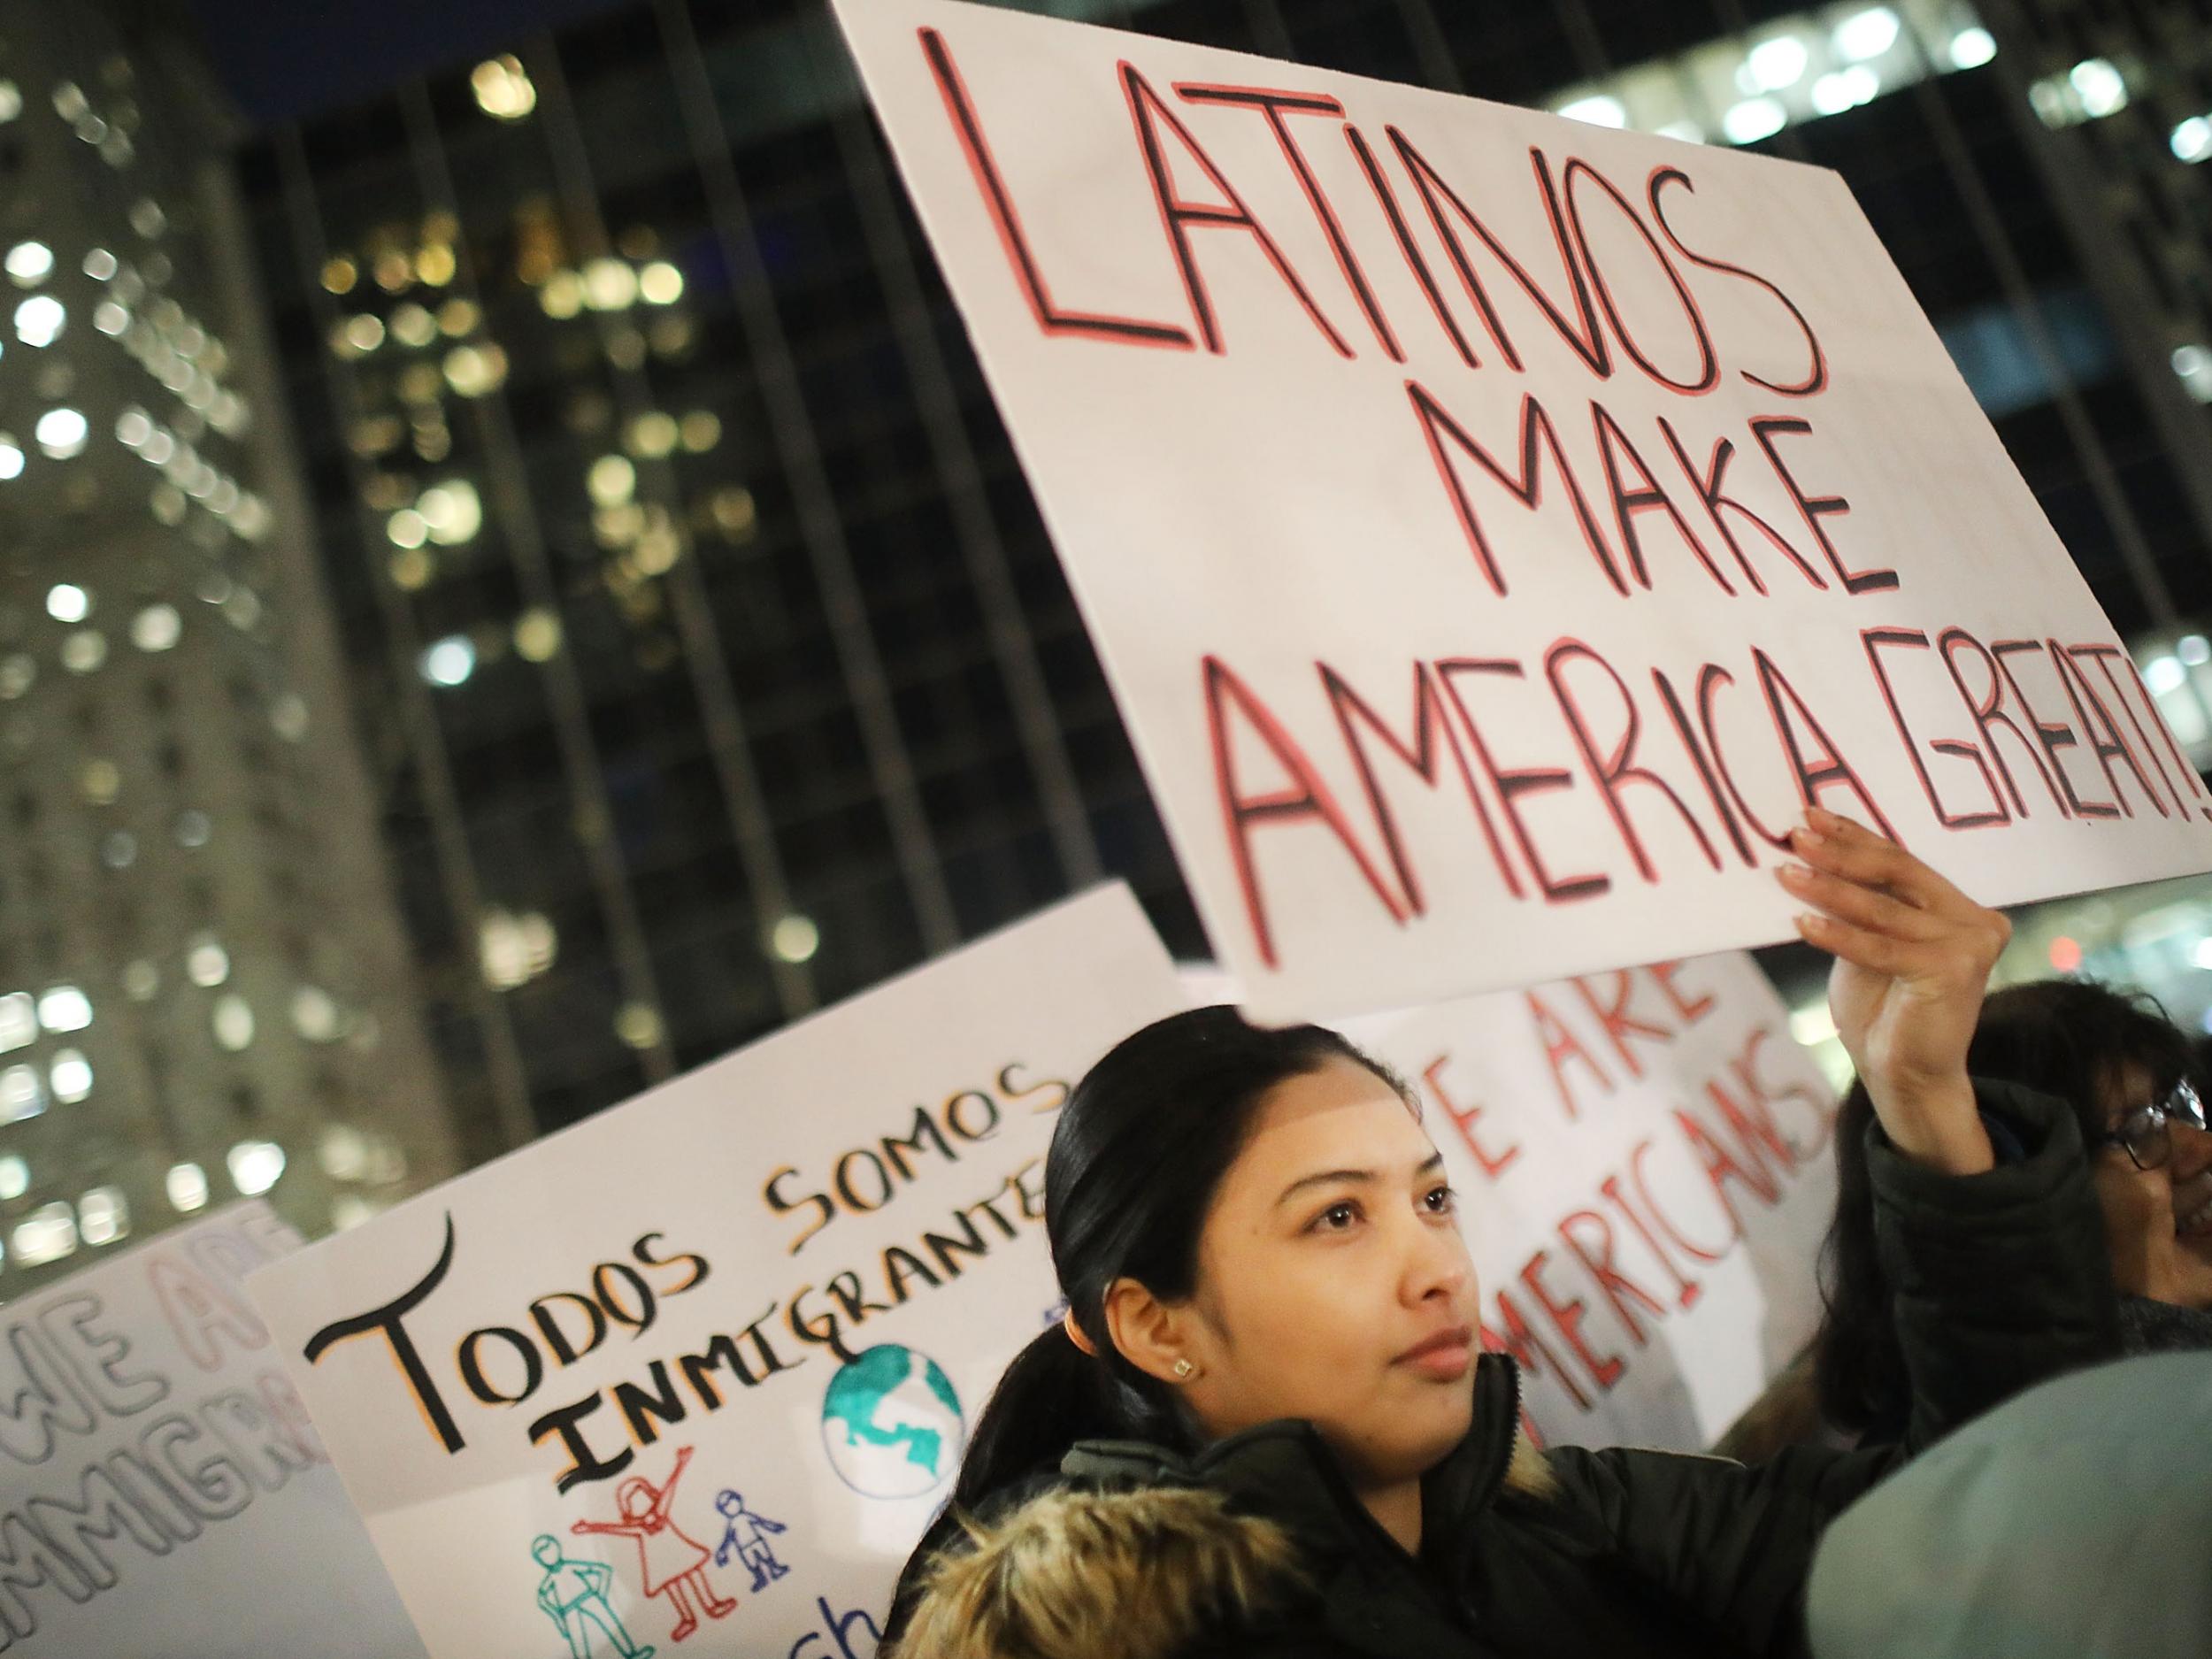 The rise in deportations has sparked protests across the US